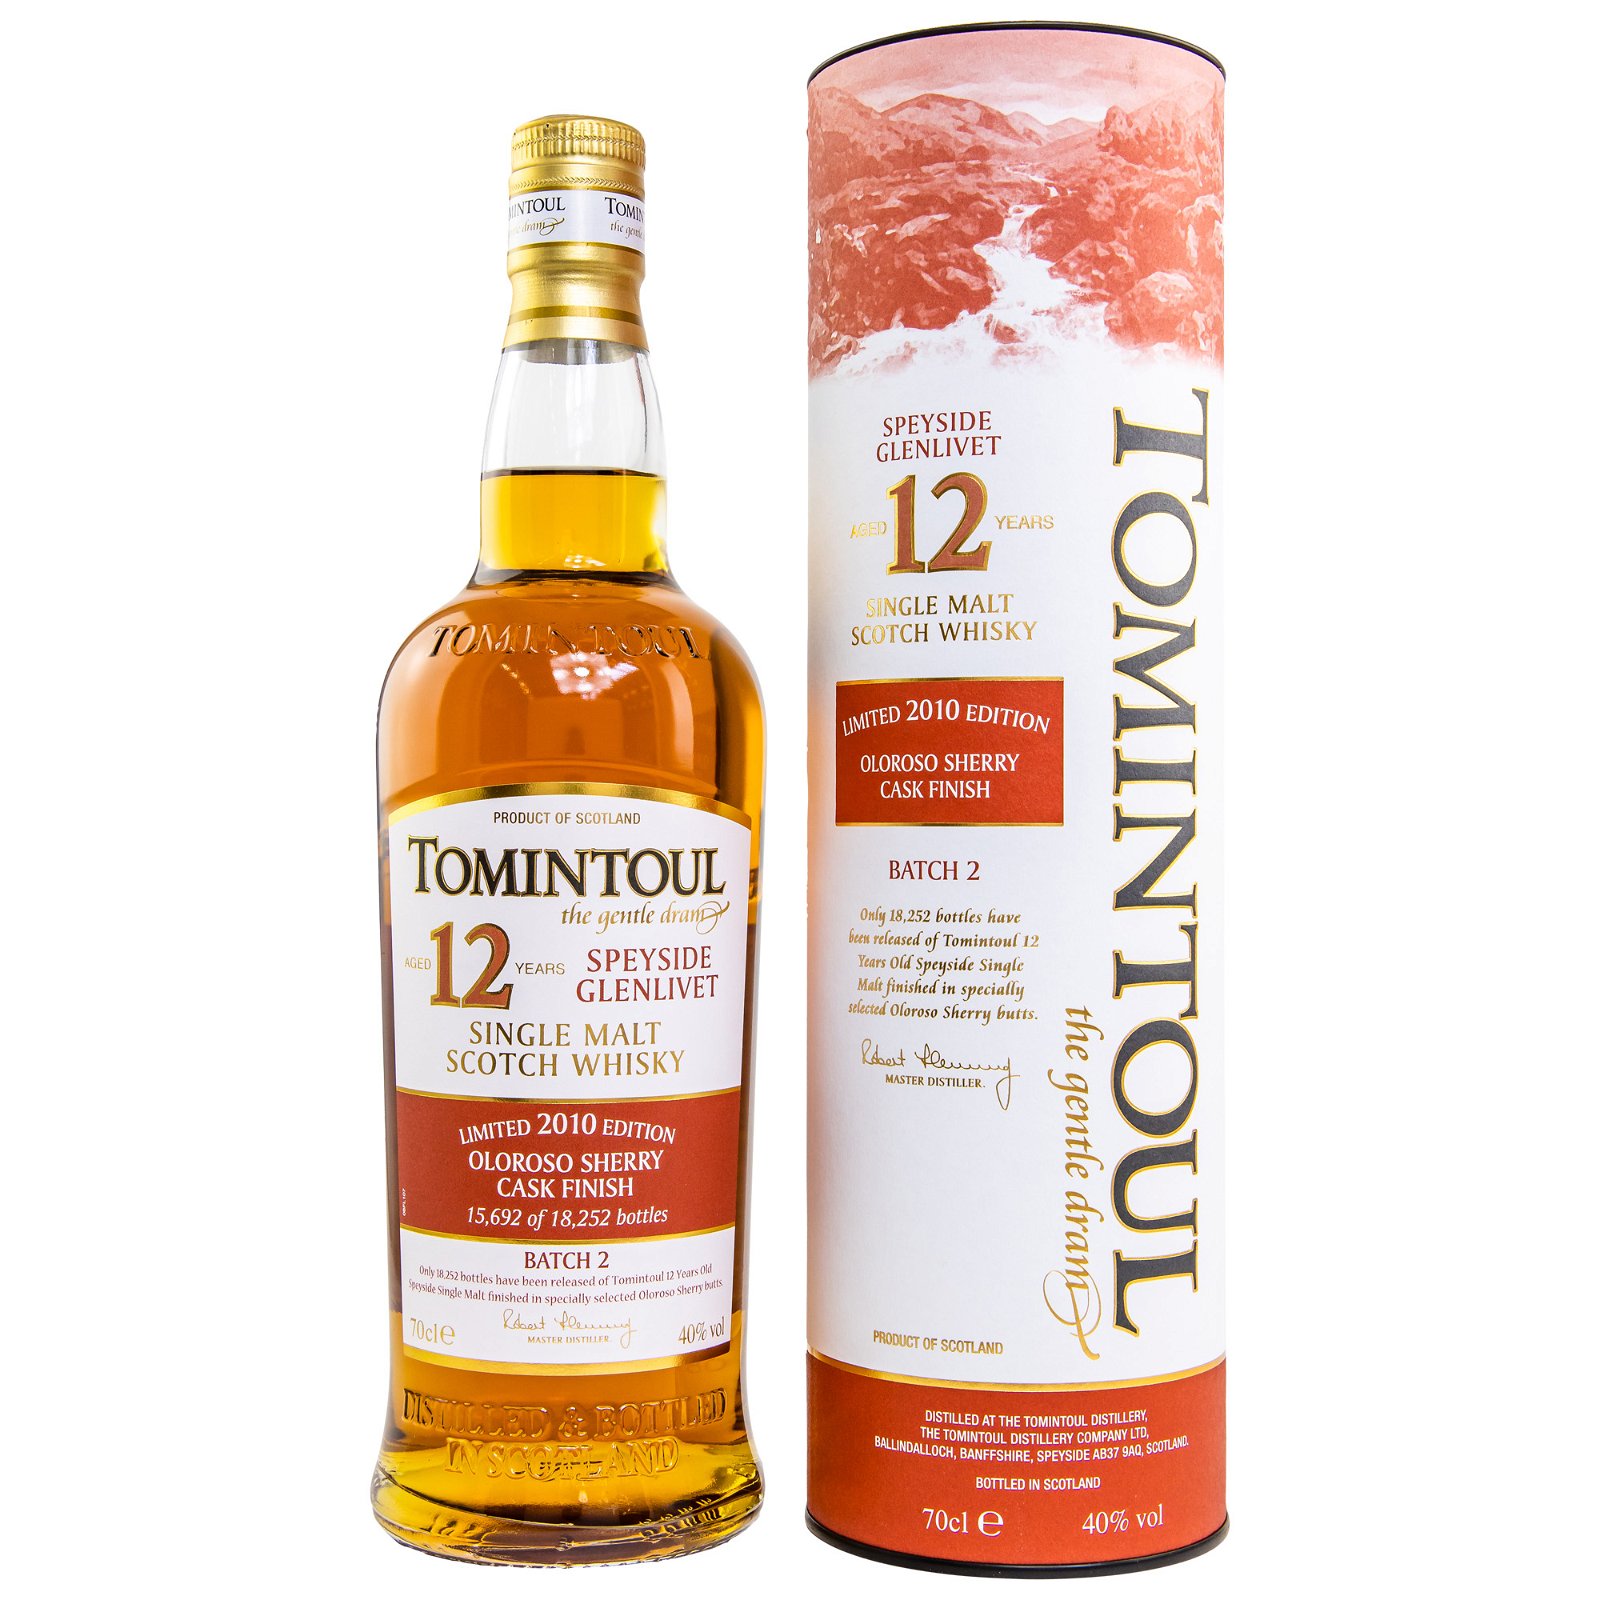 Tomintoul 12 Jahre Oloroso Sherry Cask Finish 2010 Edition